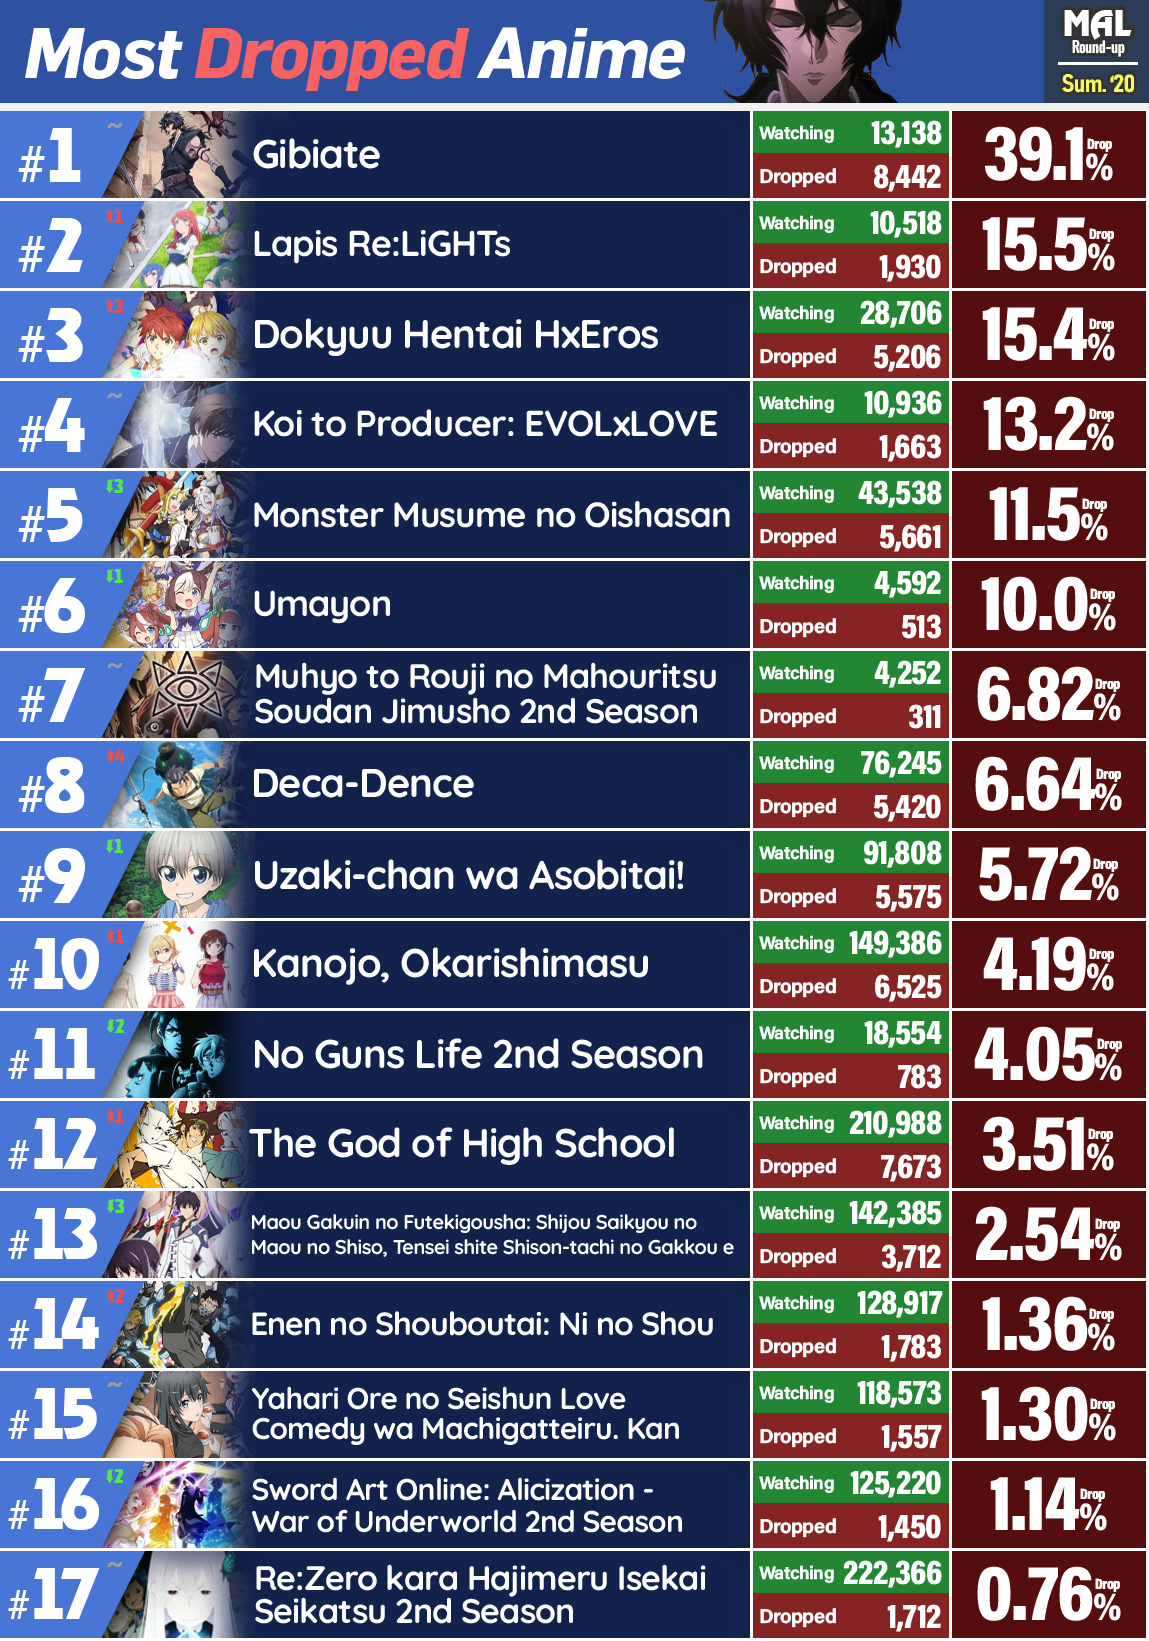 Most Popular Anime Songs at Karaoke Include 'Idol' - Siliconera-cokhiquangminh.vn